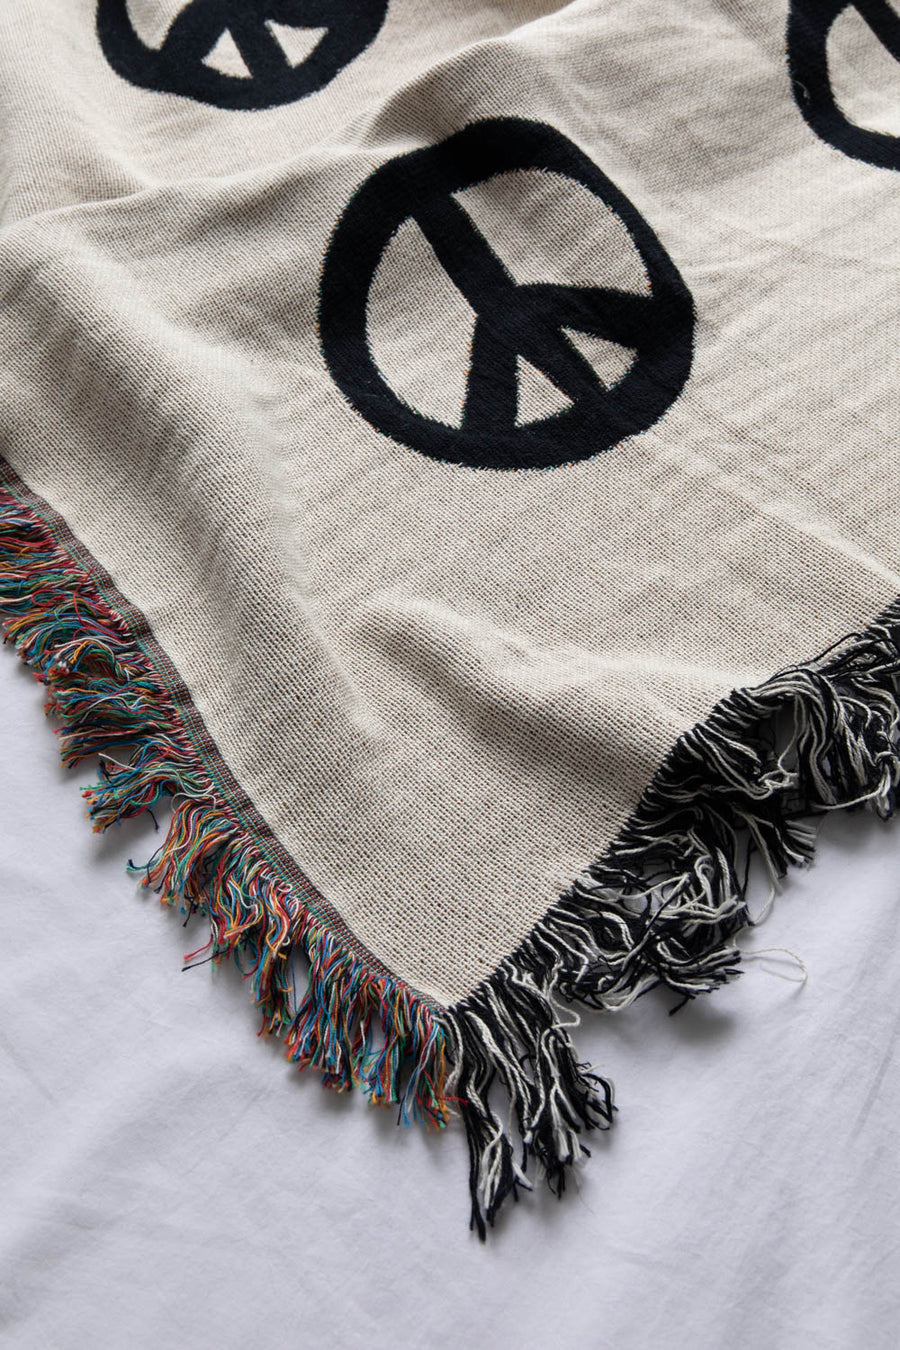 Peace Sign Throw Blanket Close Up